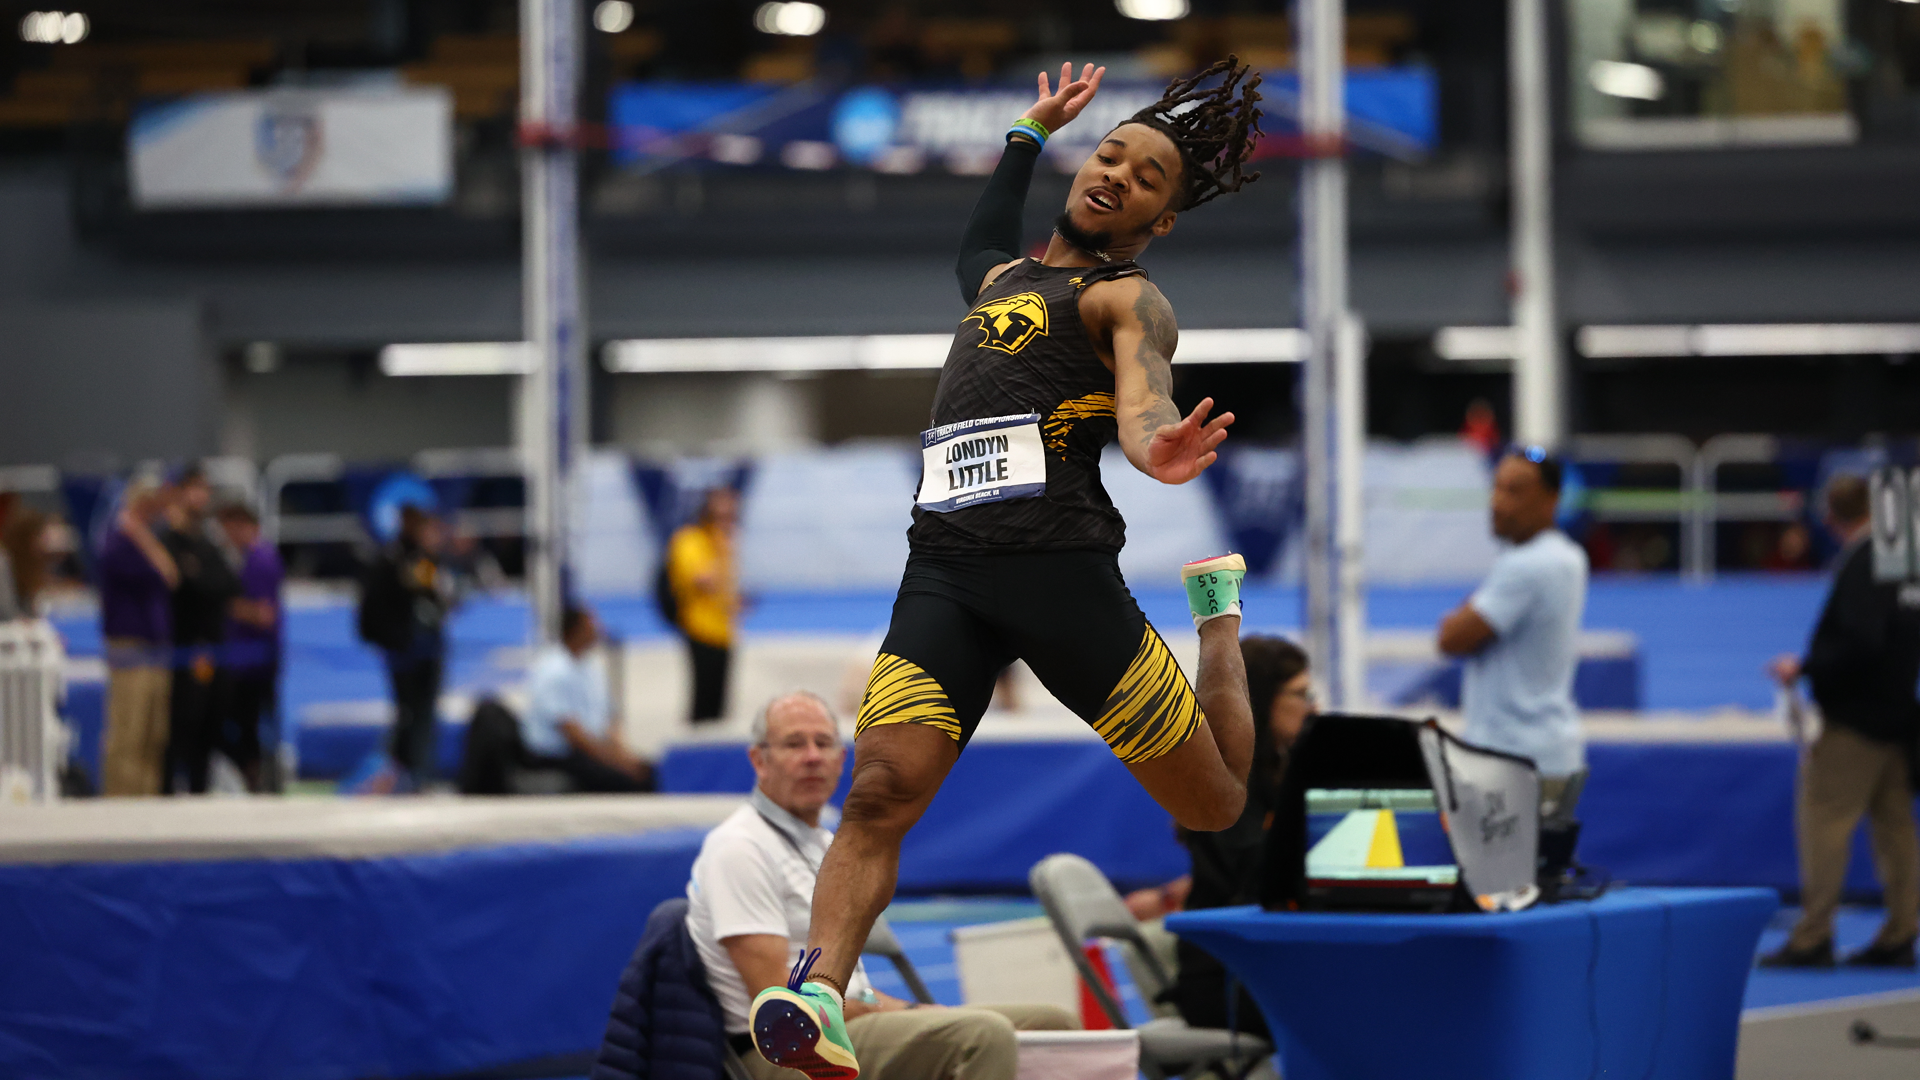 Londyn Little finished fourth in the men's long jump, collecting an All-America nod on Friday. He also qualified for the final round of the 200-meter dash with a school record 21.47 seconds. Photo Credit: Plaid Sheep Creative